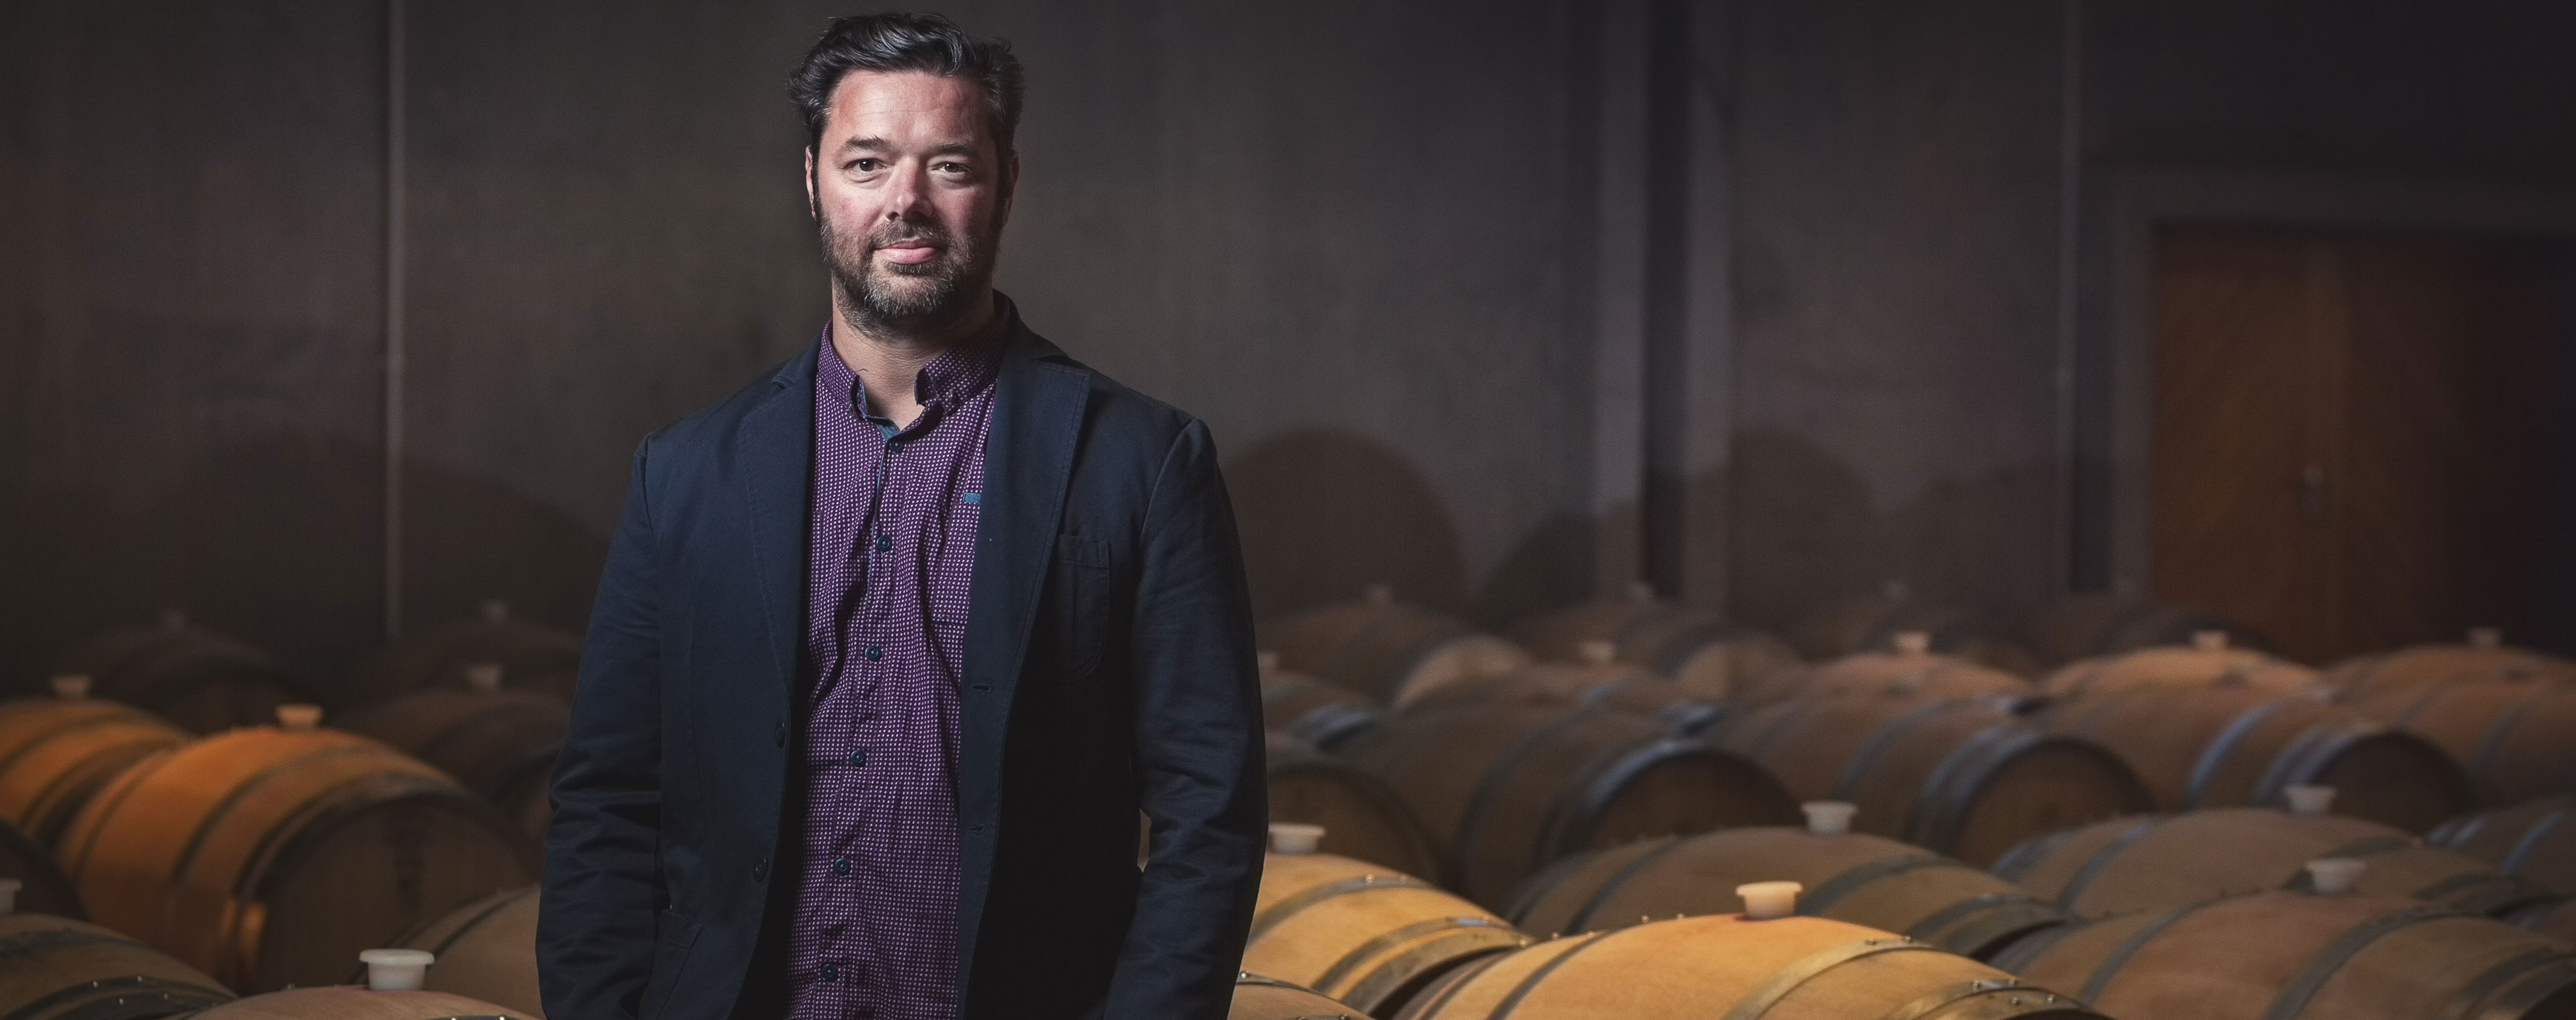 A resounding celebration of the Cloudy Bay story and the winemaker's art